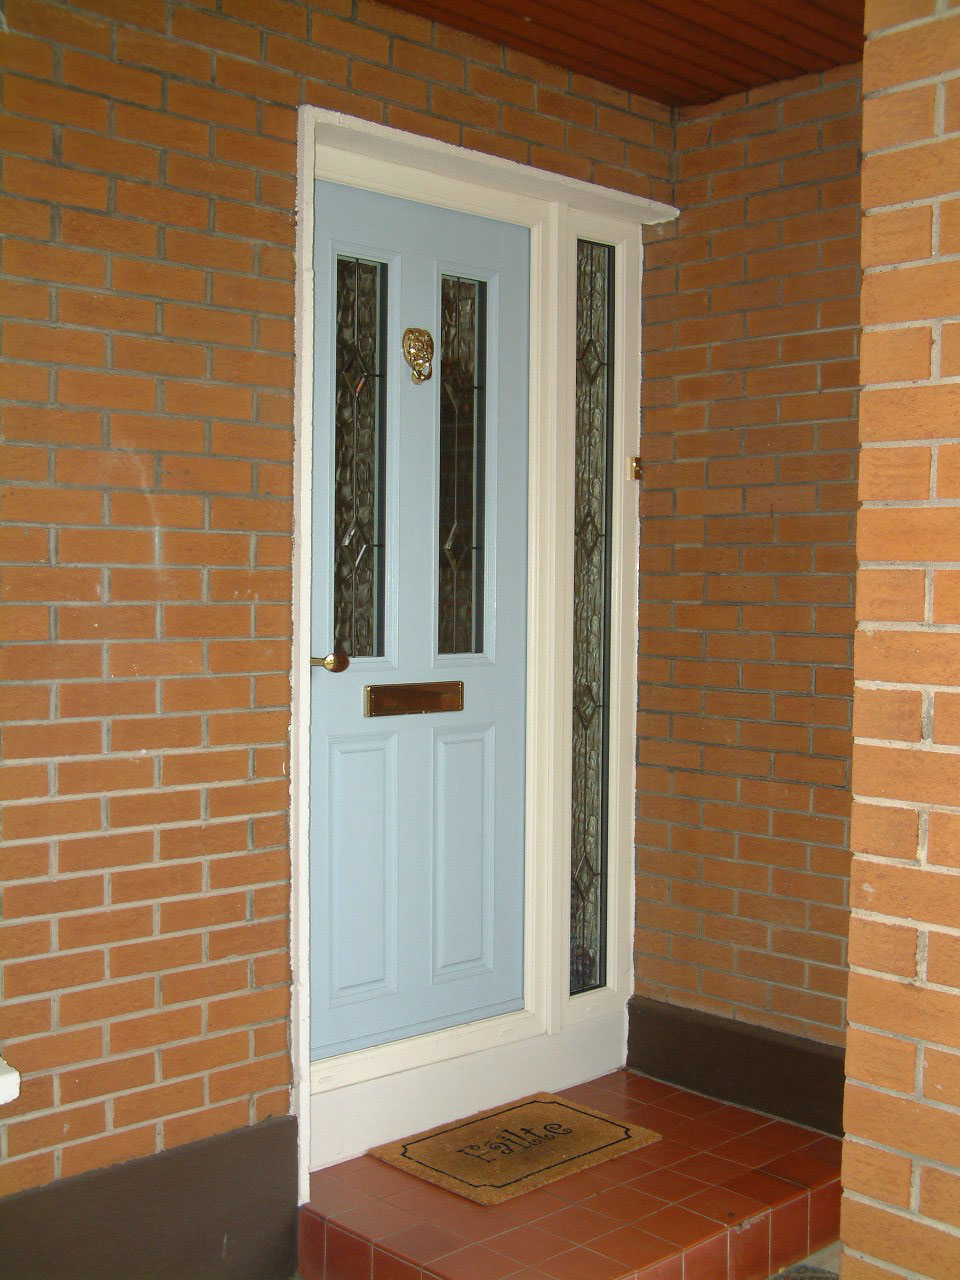 PORCELAIN BLUE APEER COMPOSITE FRONT DOOR FITTED BY ASGARD WINDOWS IN DUBLIN 16.